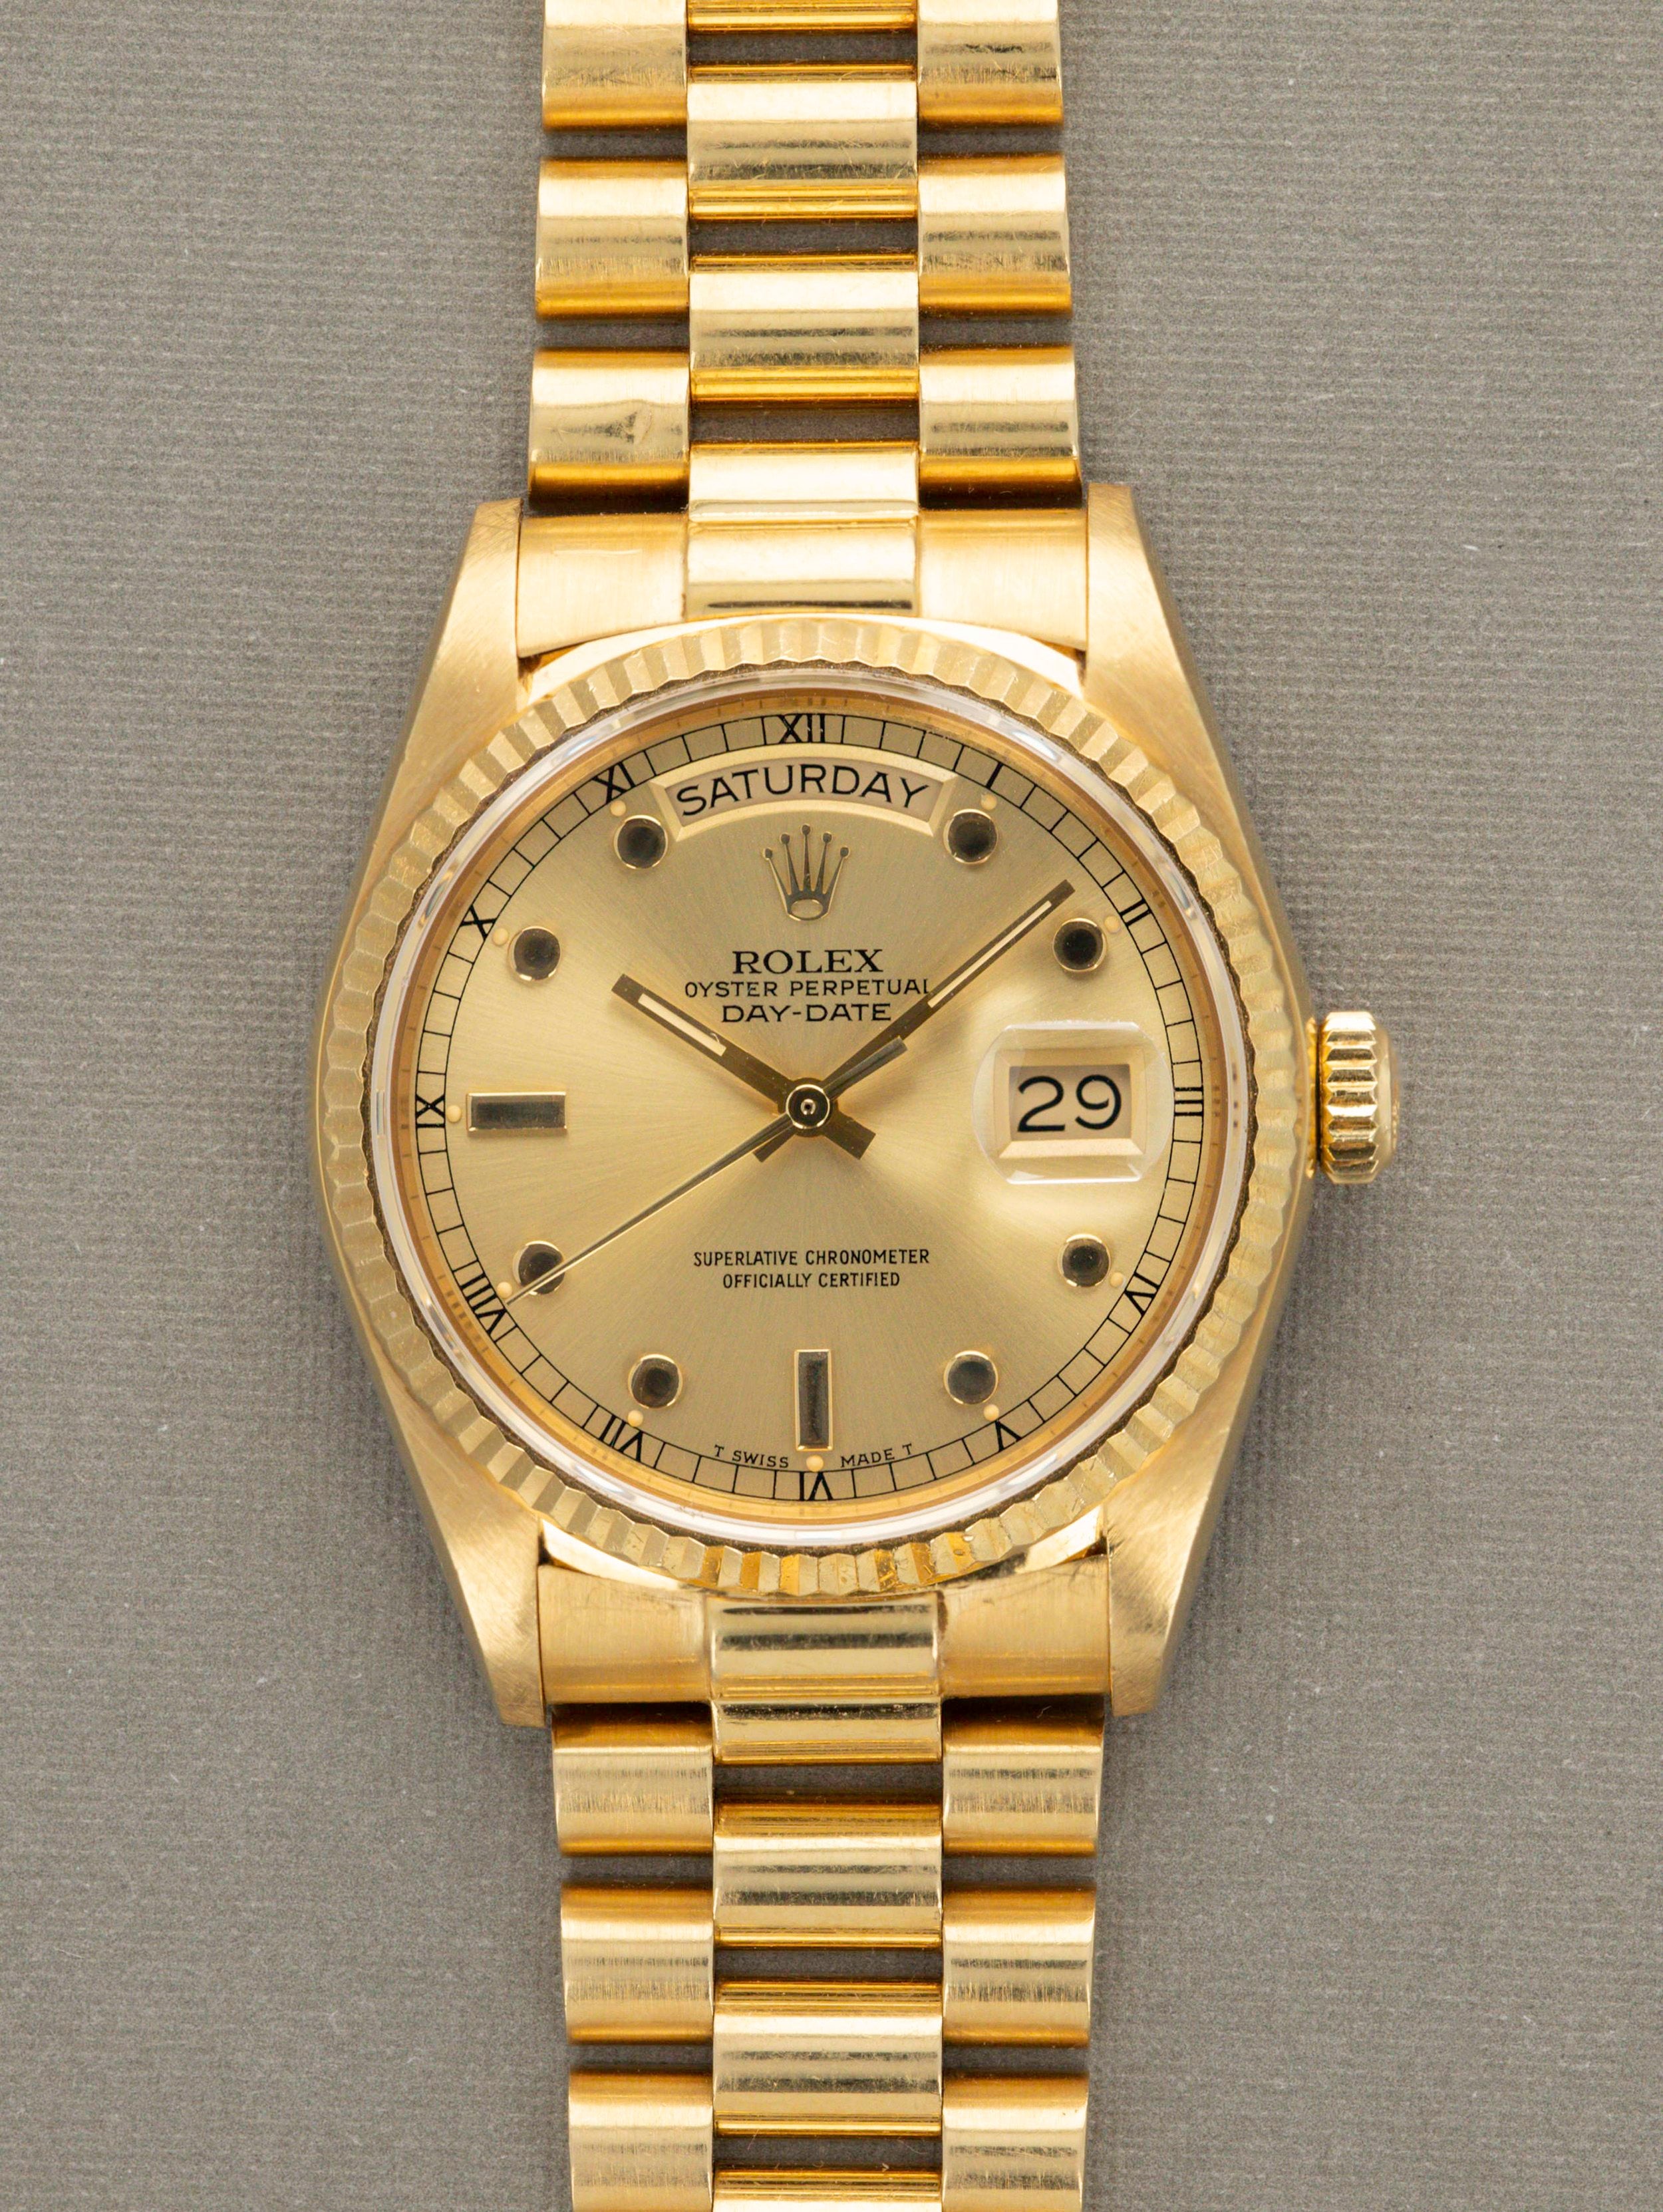 Rolex Day-Date Ref. 18038 - 'Pinball' Dial Unpolished